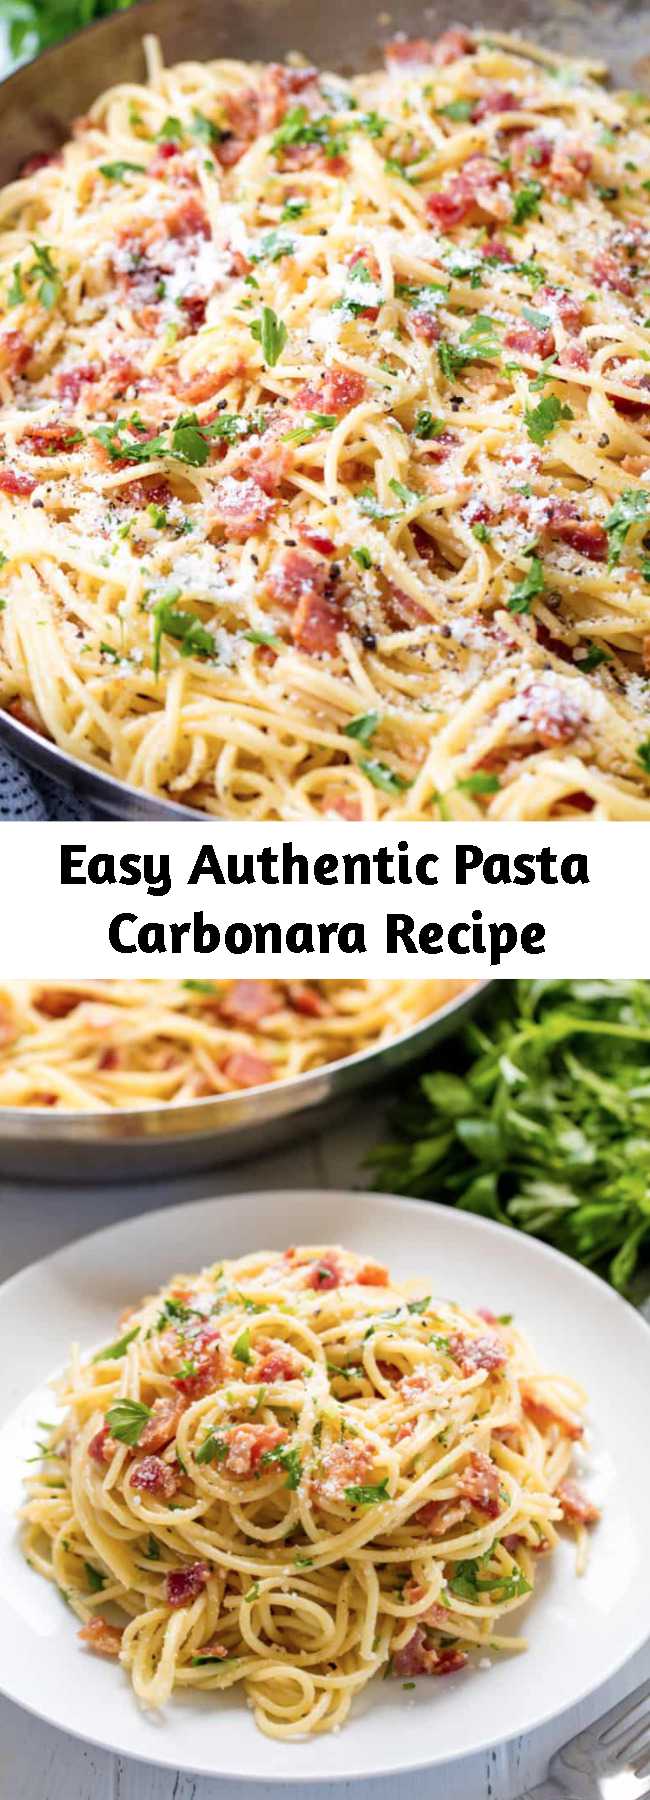 Easy Authentic Pasta Carbonara Recipe - Authentic Pasta Carbonara is easy to make, full of bacon flavor, and smothered in a cheesy egg sauce that will make you crave more. Your family will love this easy weeknight dinner! #recipe #pasta